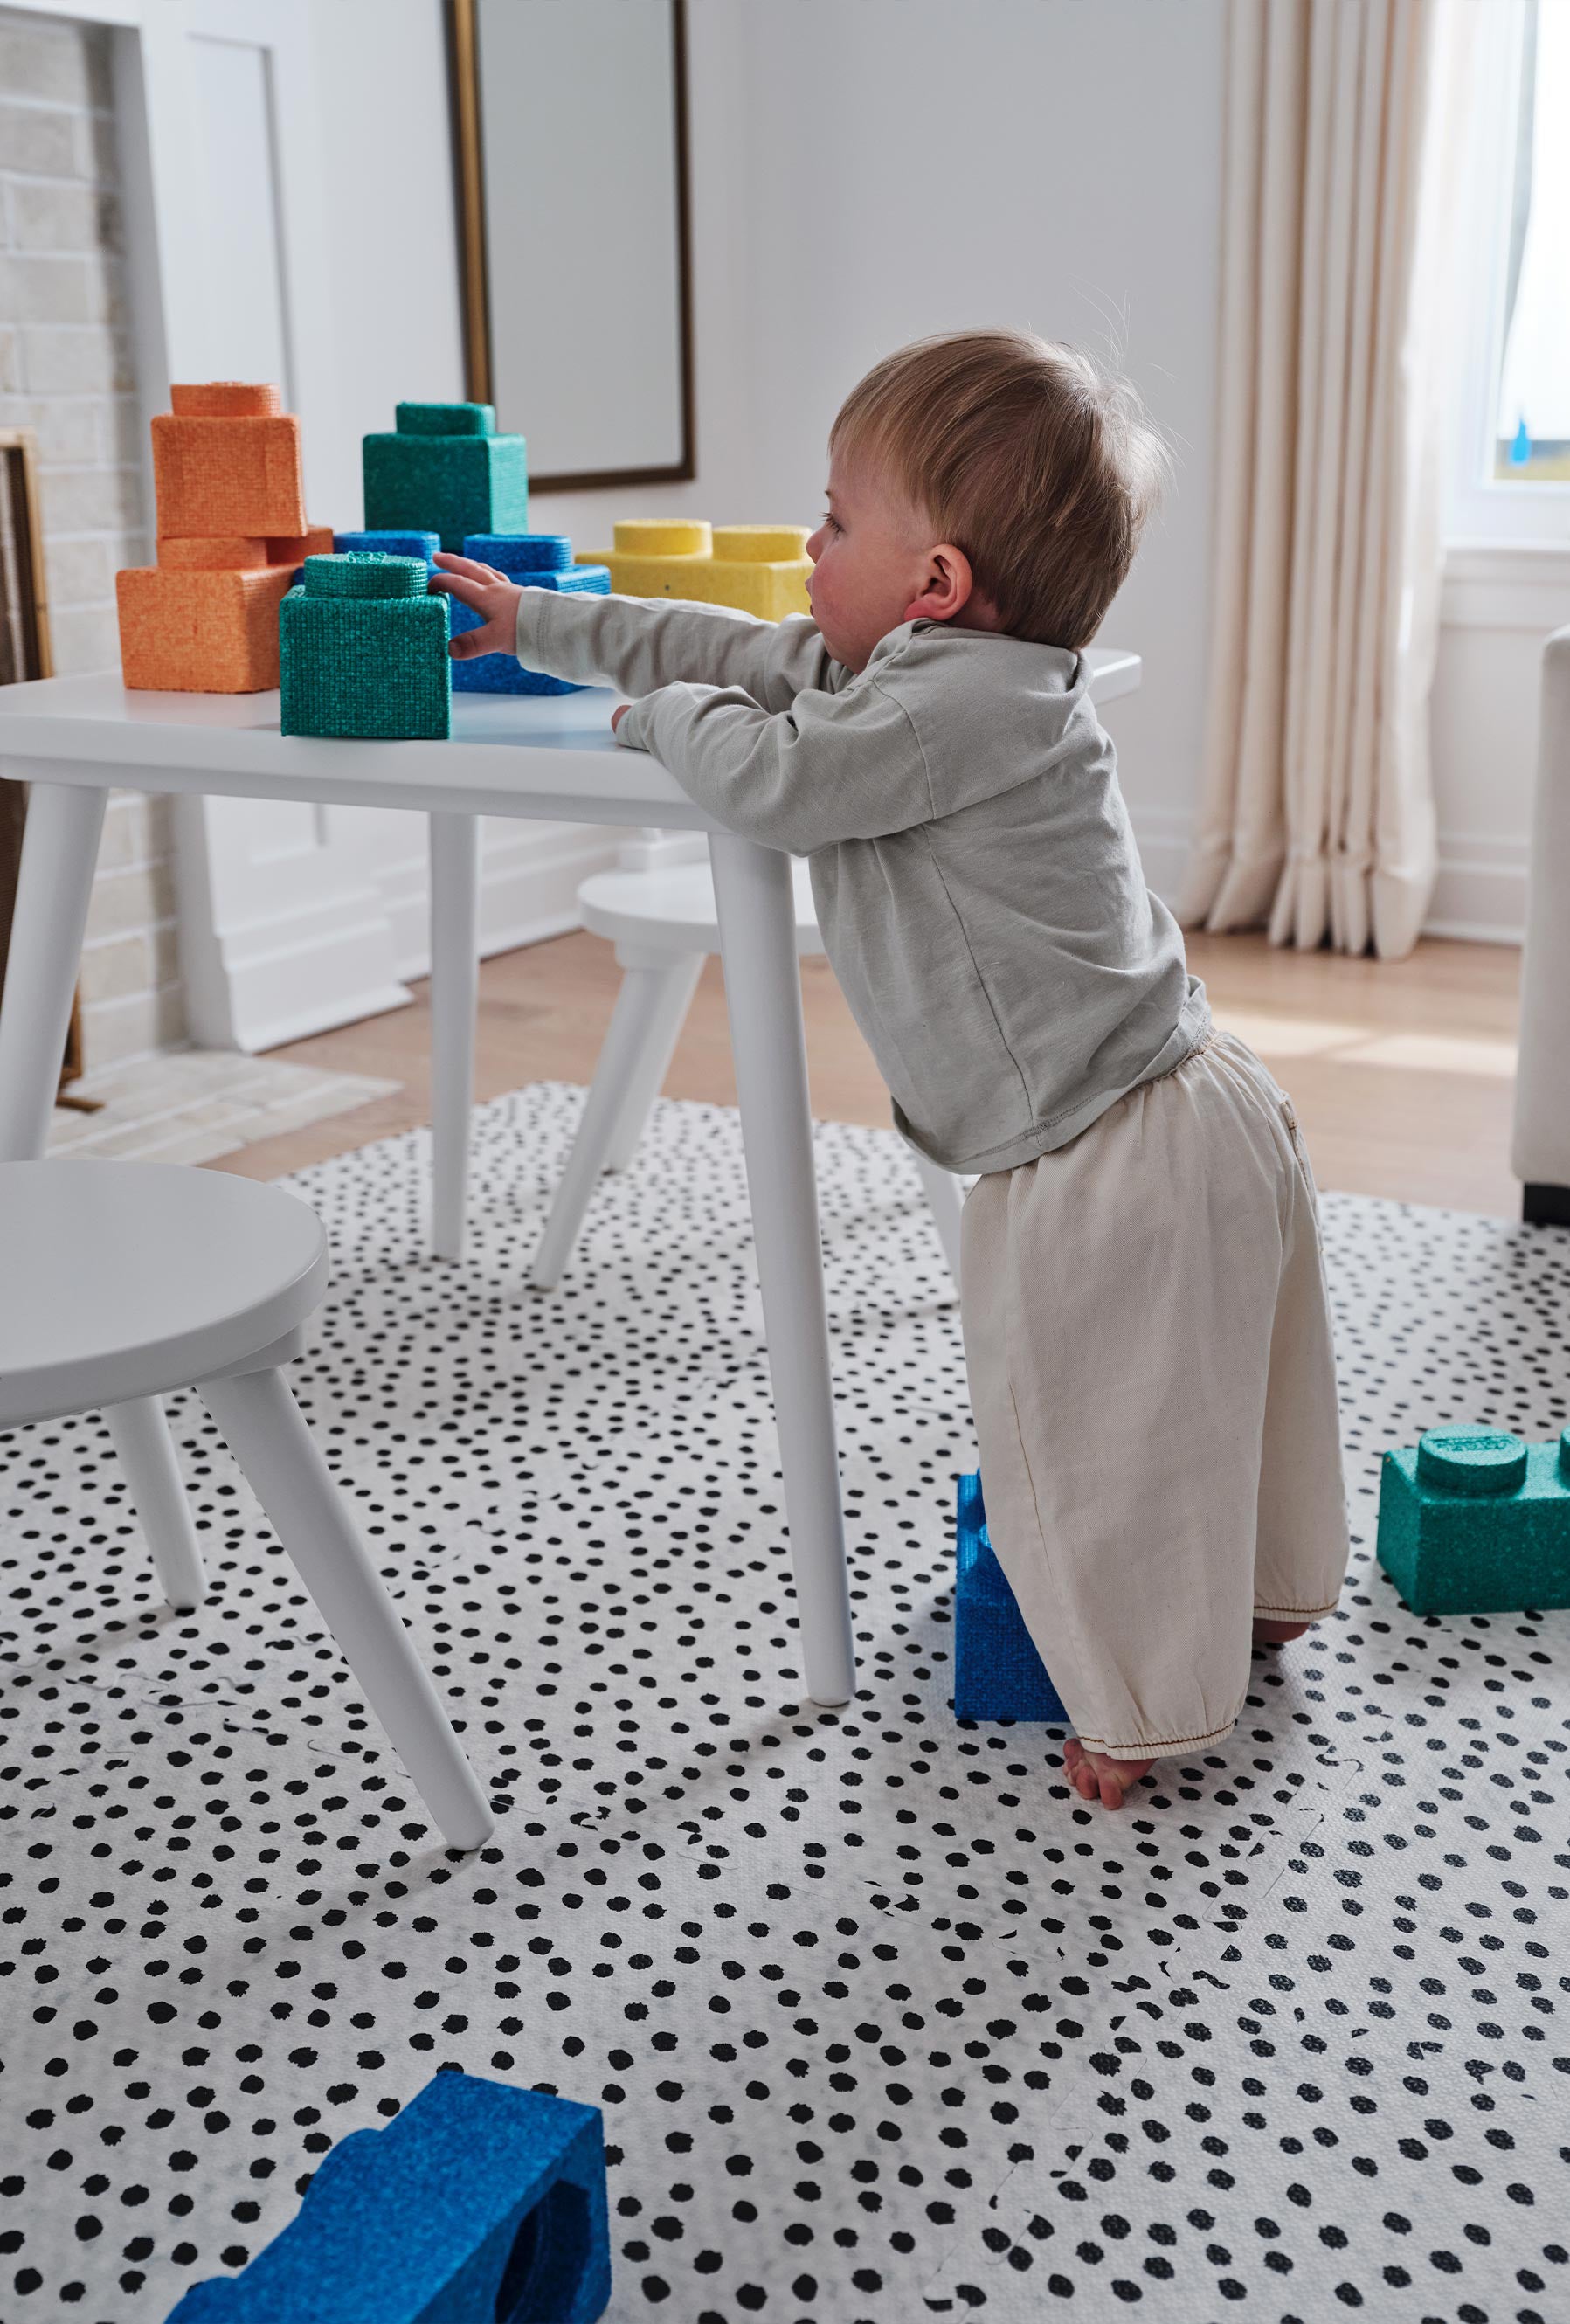 Apollo pepper black and white polka dot play mat shown in living room with baby putting large lego blocks on play table